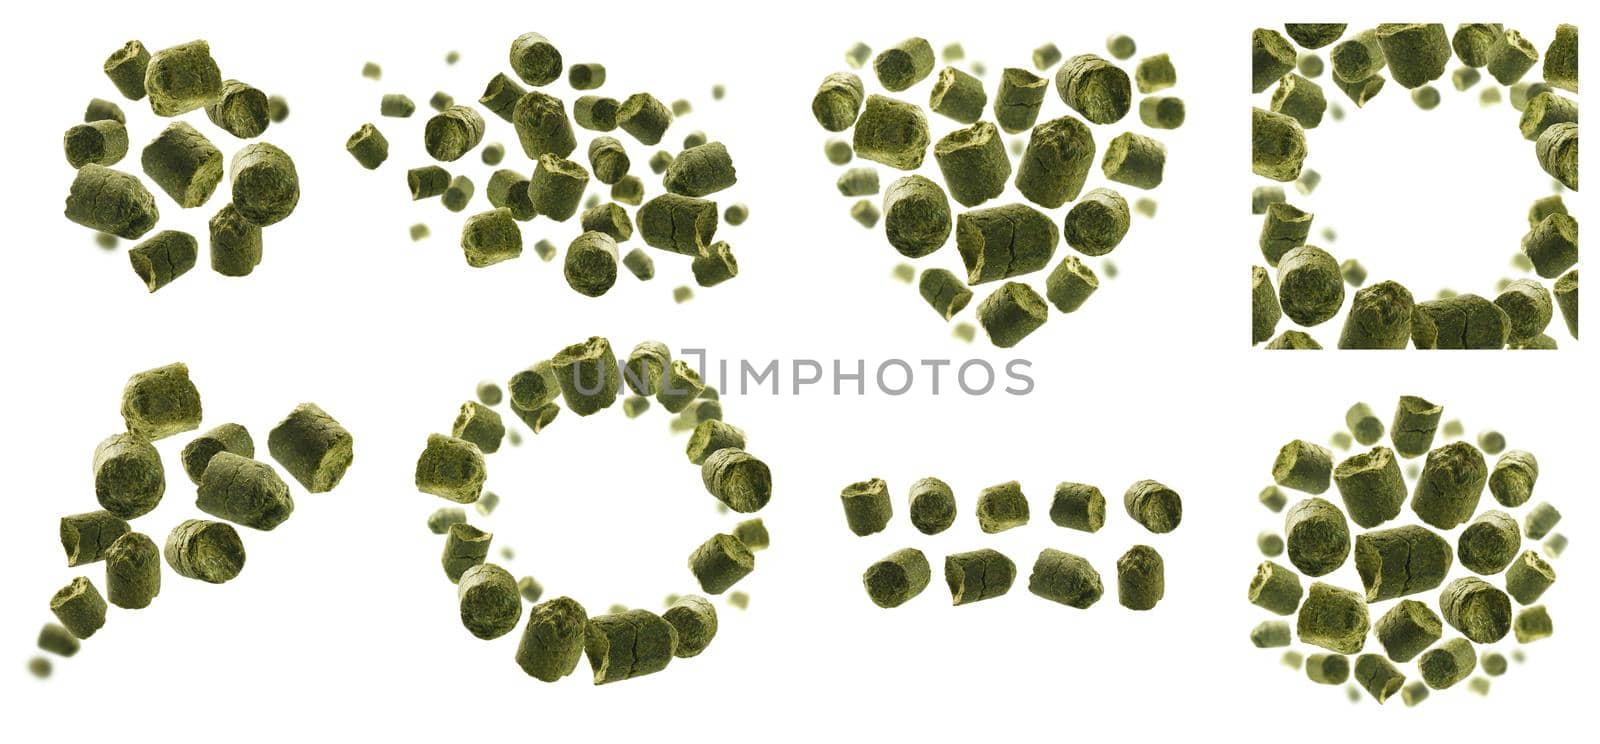 A set of photos. Green granulated hops levitate on a white background.